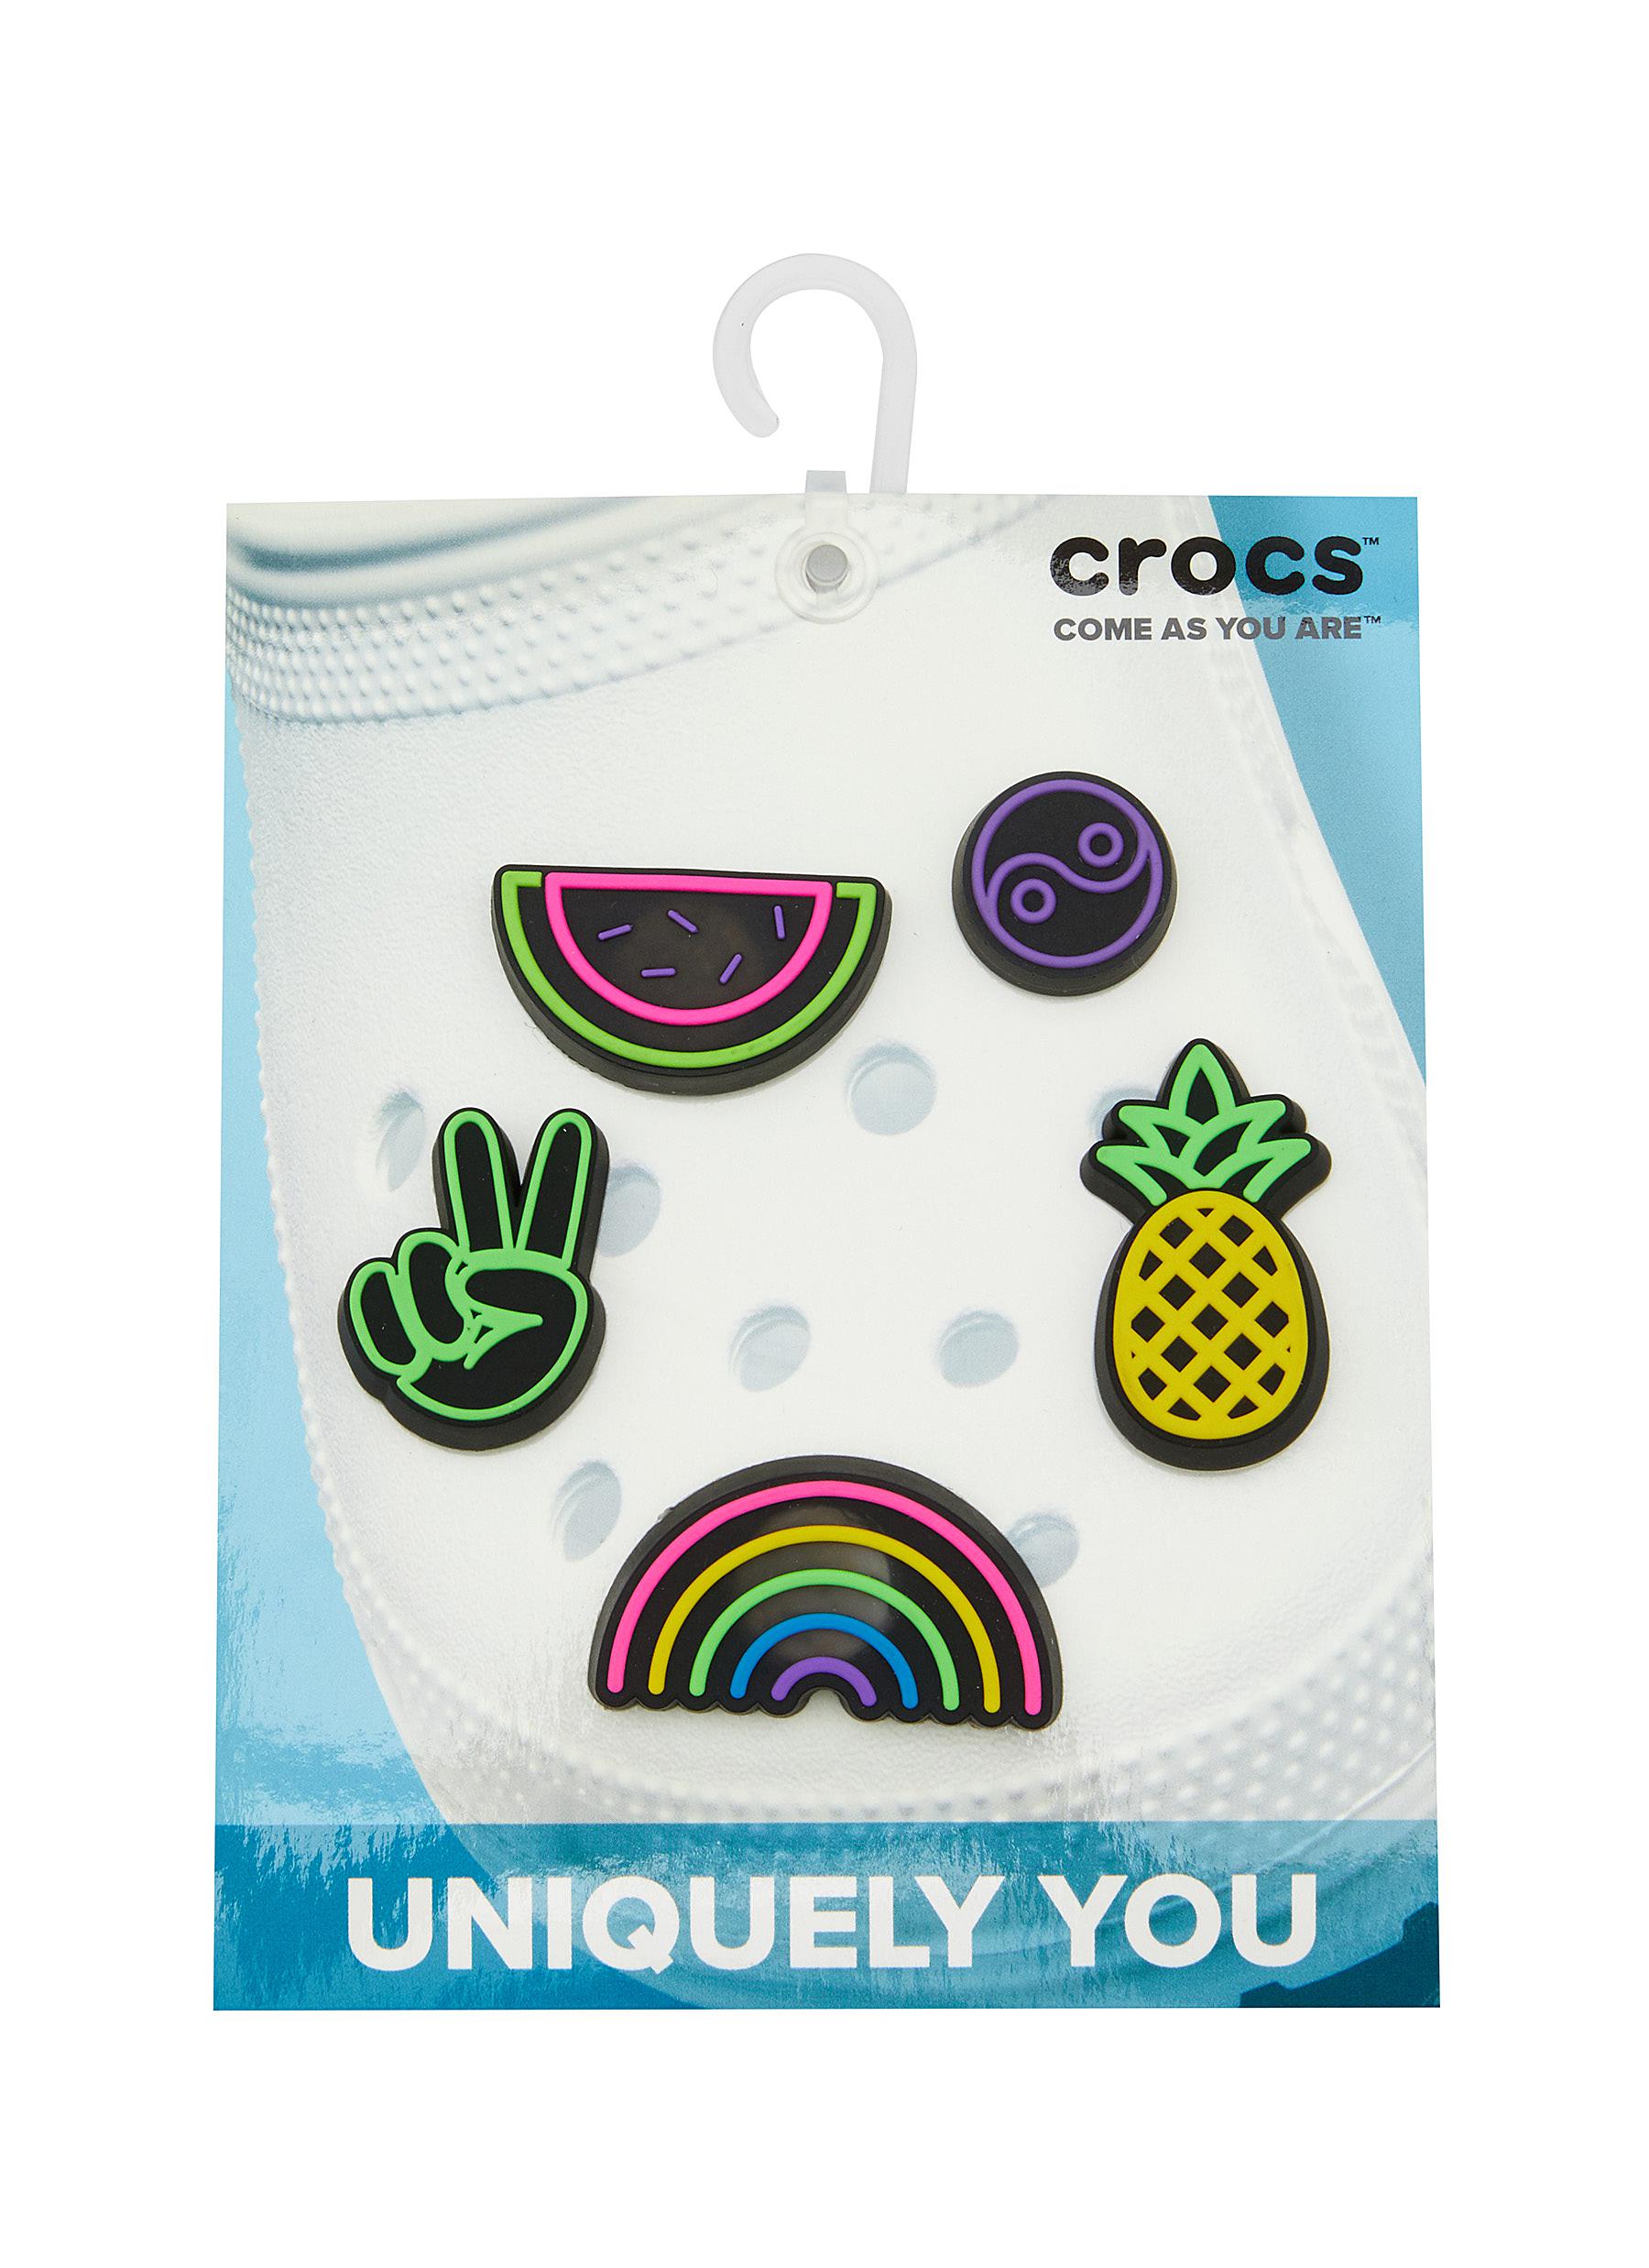 Dress Up Your Crocs with Charms: A Fun and Easy Way to